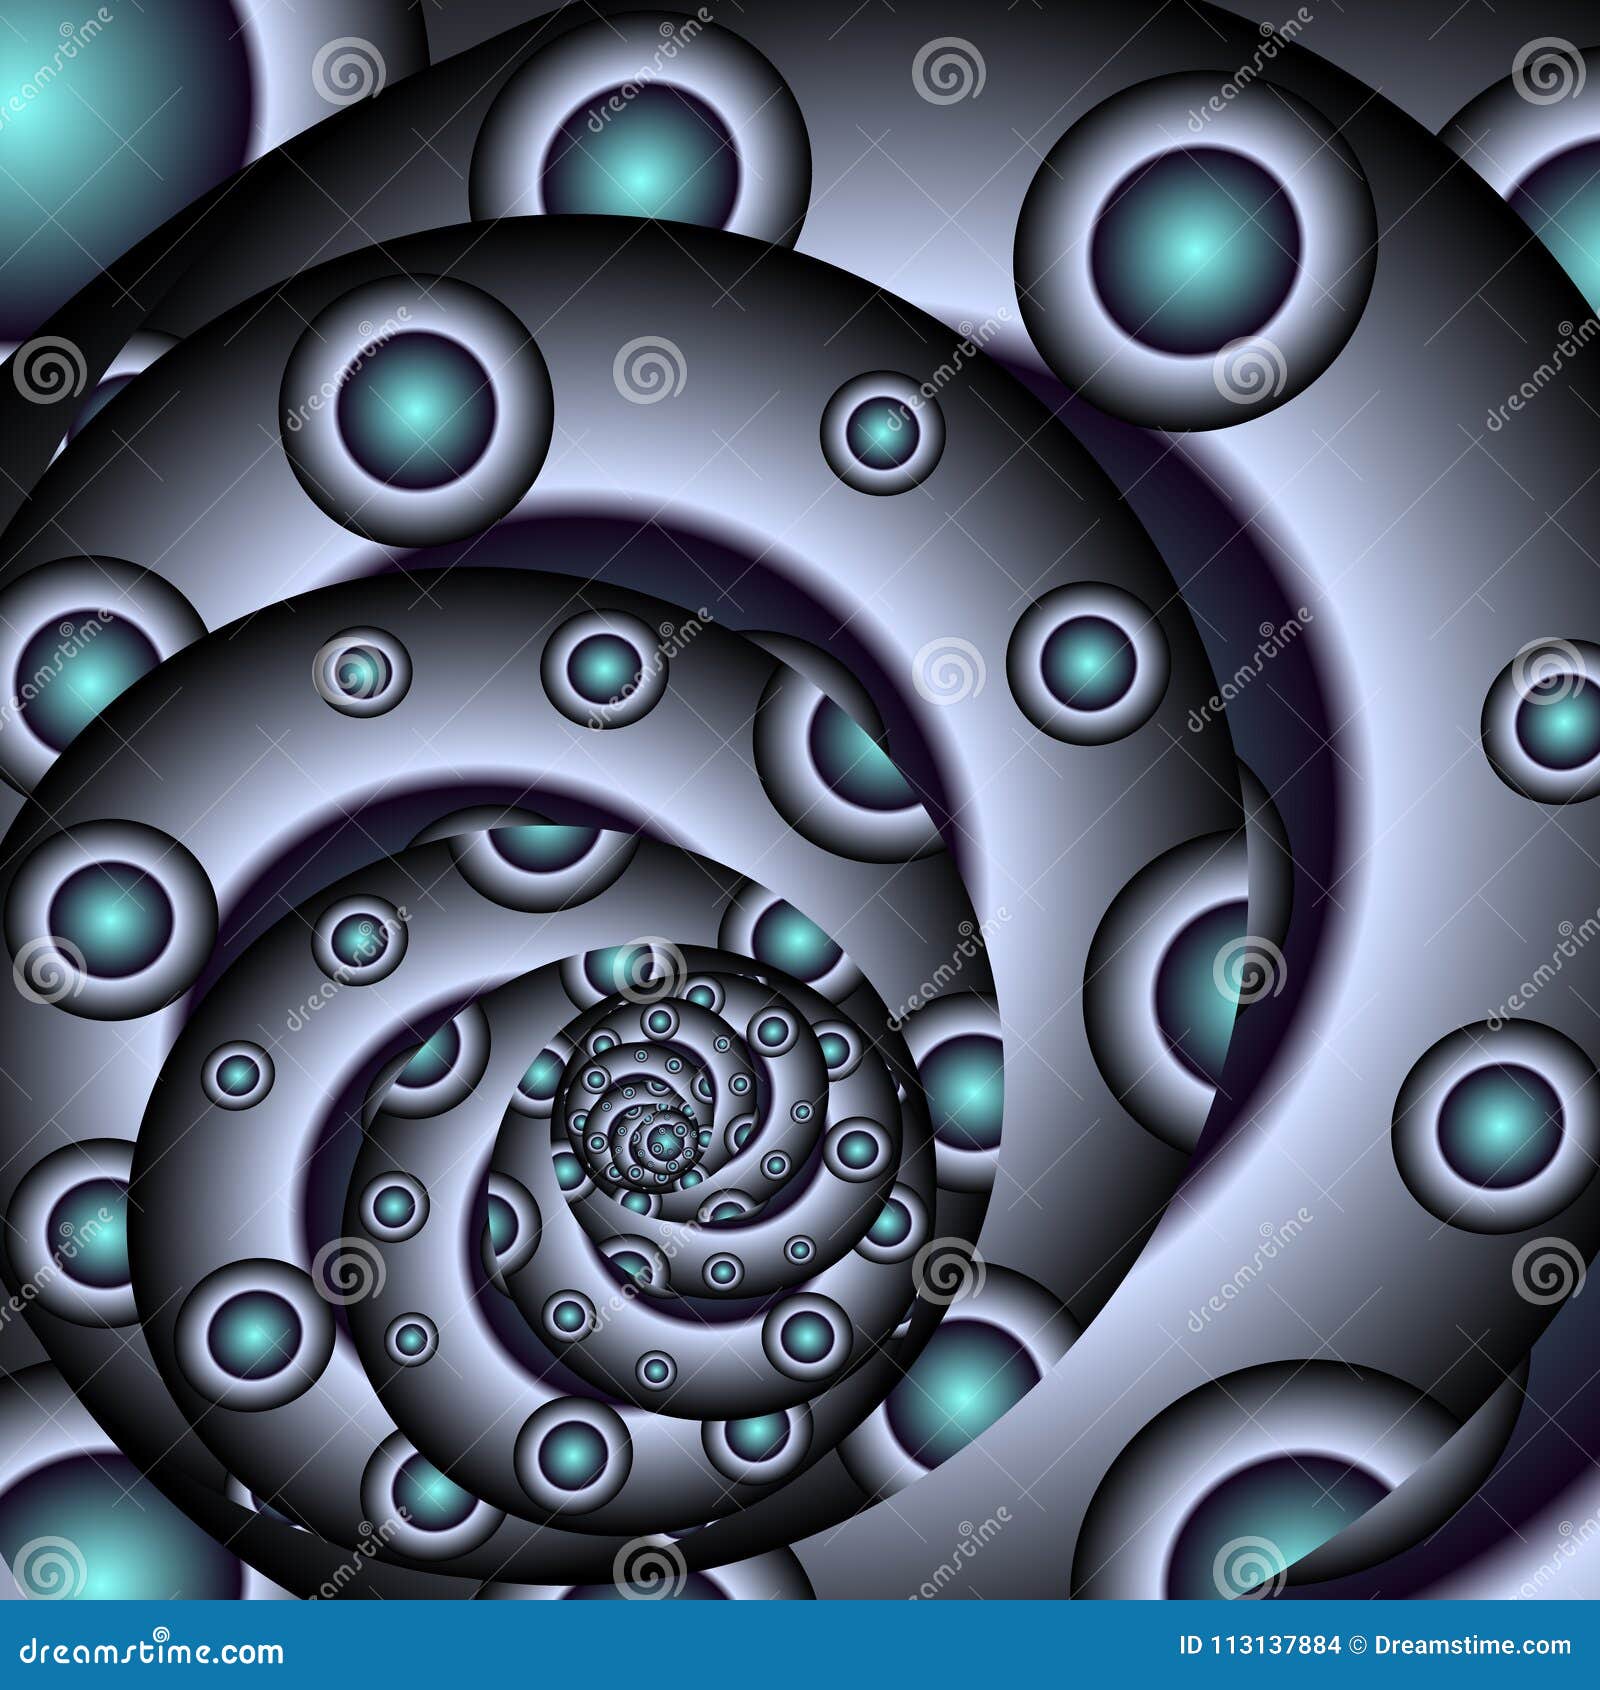 https://thumbs.dreamstime.com/z/abstract-glossy-grey-blue-background-fractal-spiralling-illustration-universal-space-cosmos-concepts-spiral-galaxy-far-113137884.jpg